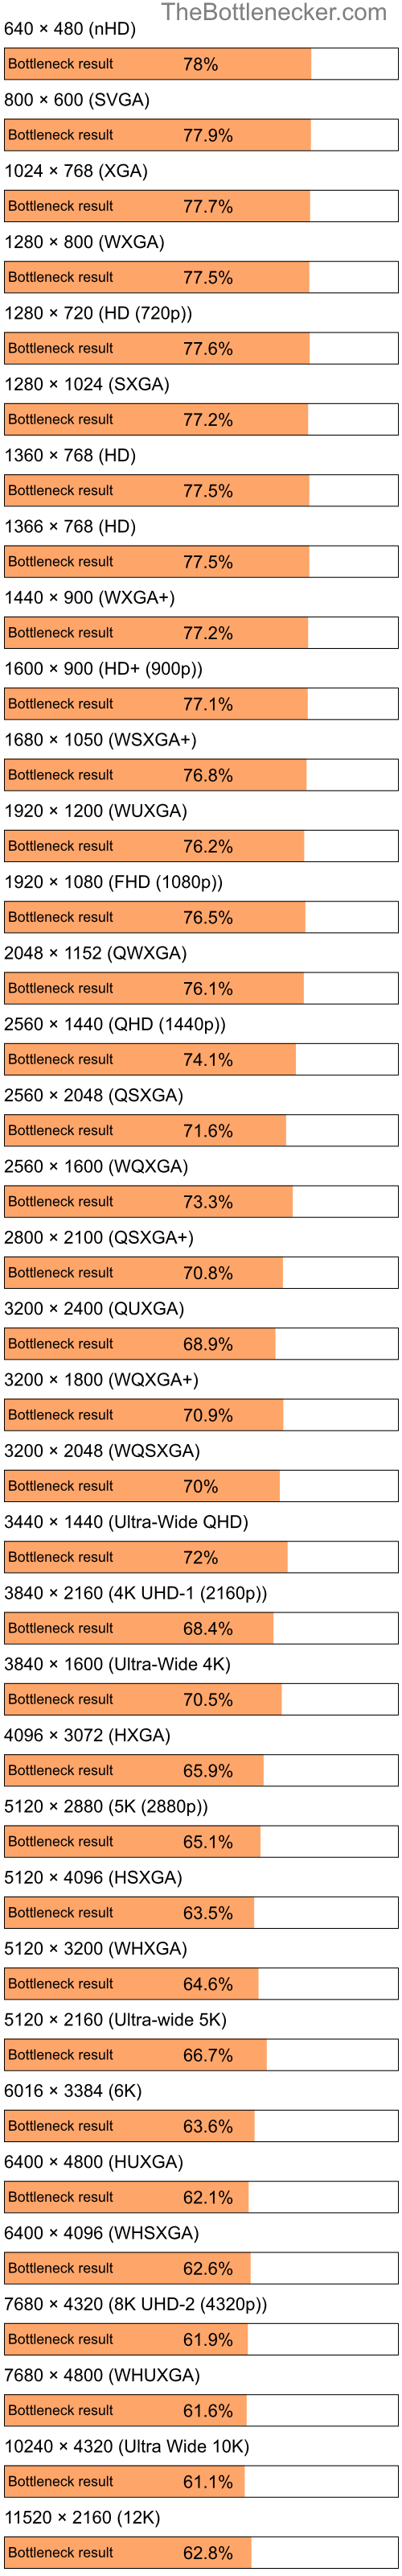 Bottleneck results by resolution for AMD A4-6300B and NVIDIA GeForce RTX 3070 in General Tasks